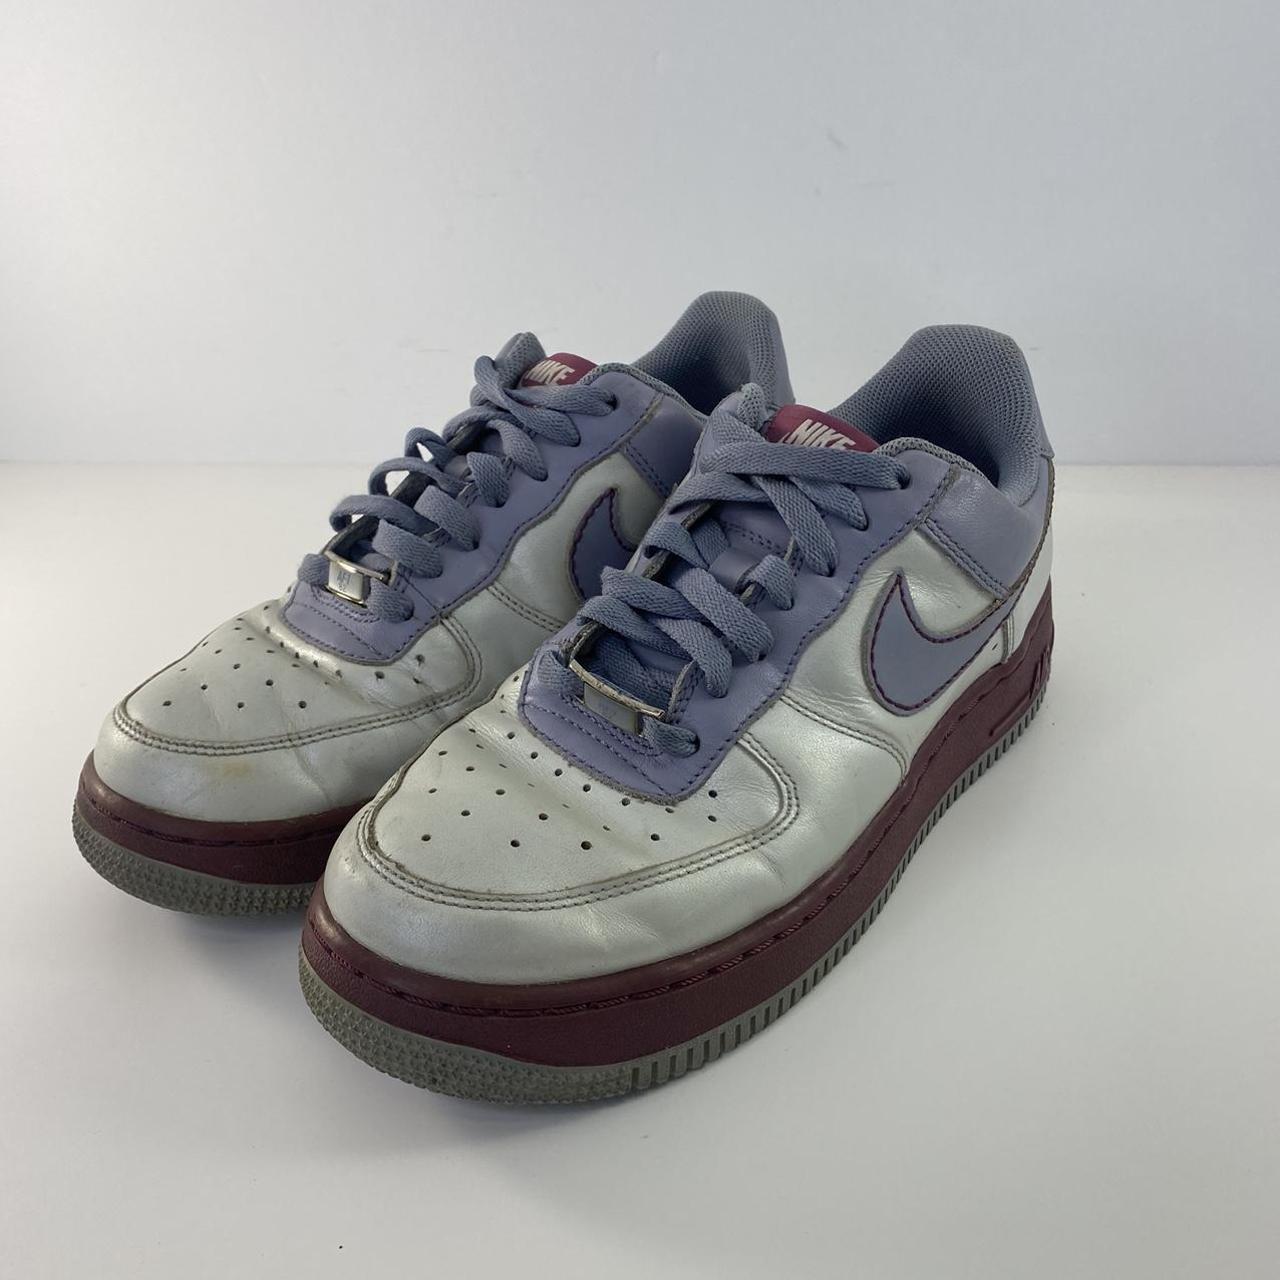 Nike Air Force 1 XXV AF-1 '82 Pebble Grey & Red/Maroon 315115-002 Size 8.5